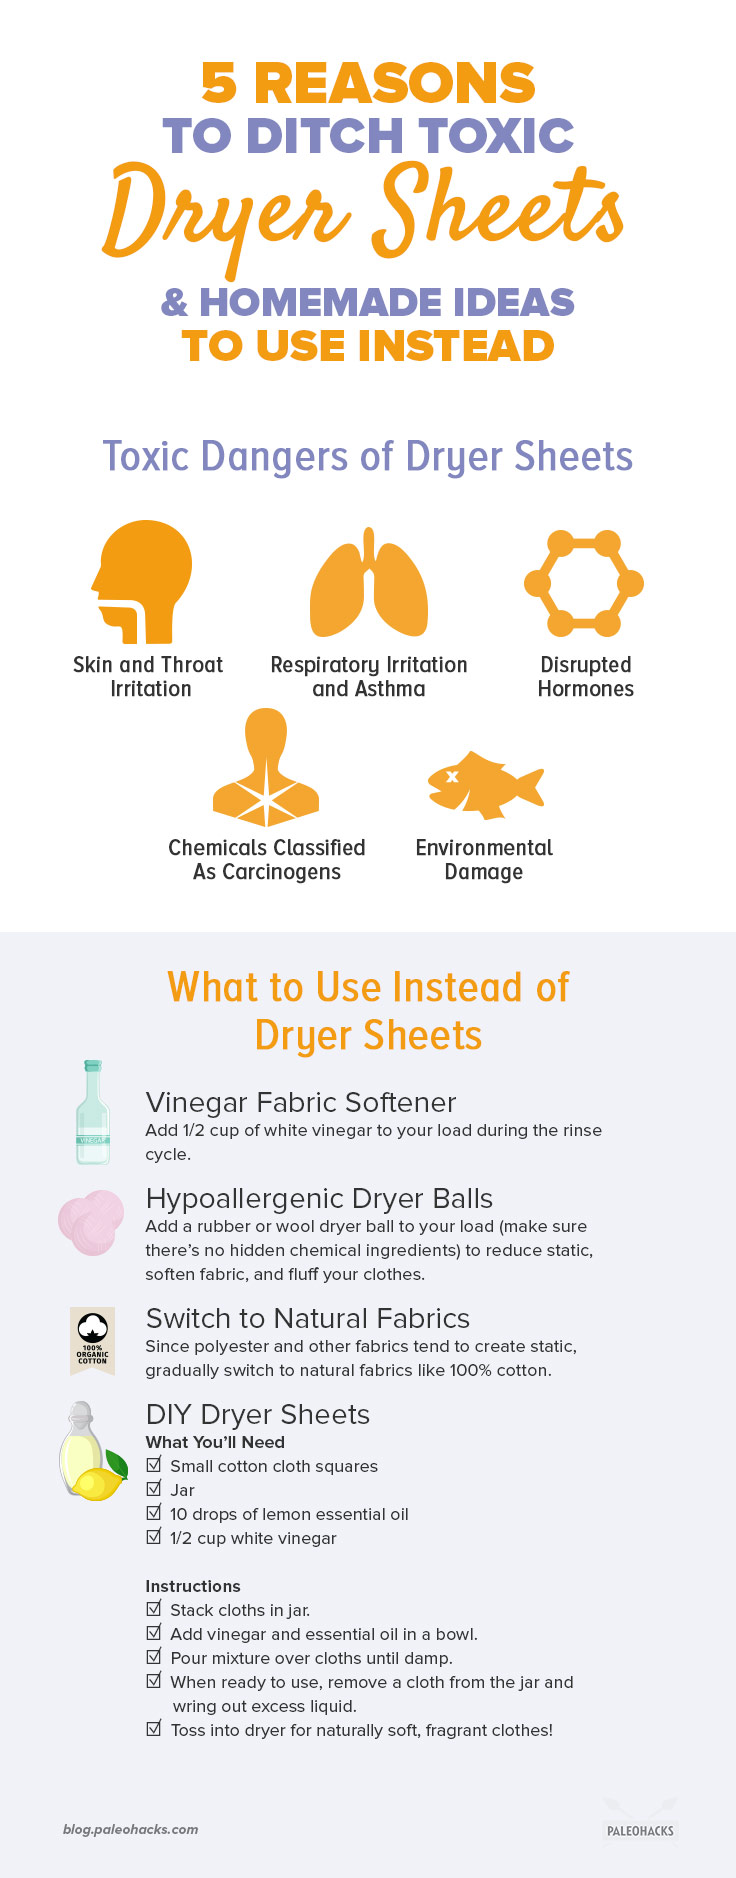 Unfortunately, while dryer sheets make your clothes feel and smell wonderful, the chemicals used to make them so effective are incredibly toxic.